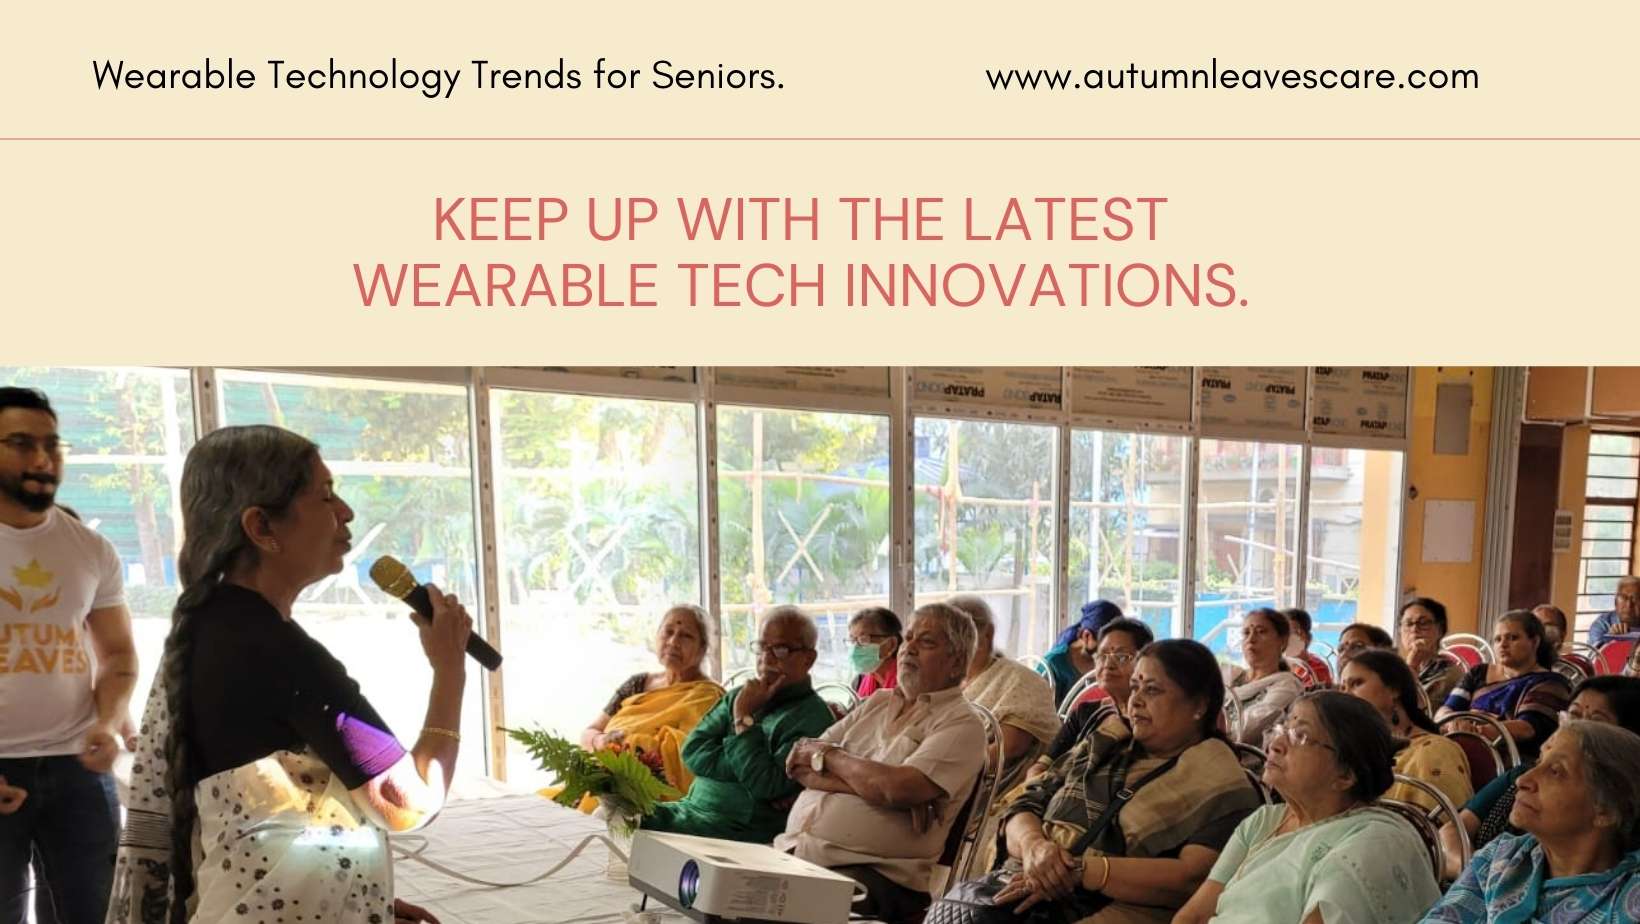 Wearable Technology Trends for Seniors: Innovations in Health Monitoring and Activity Tracking